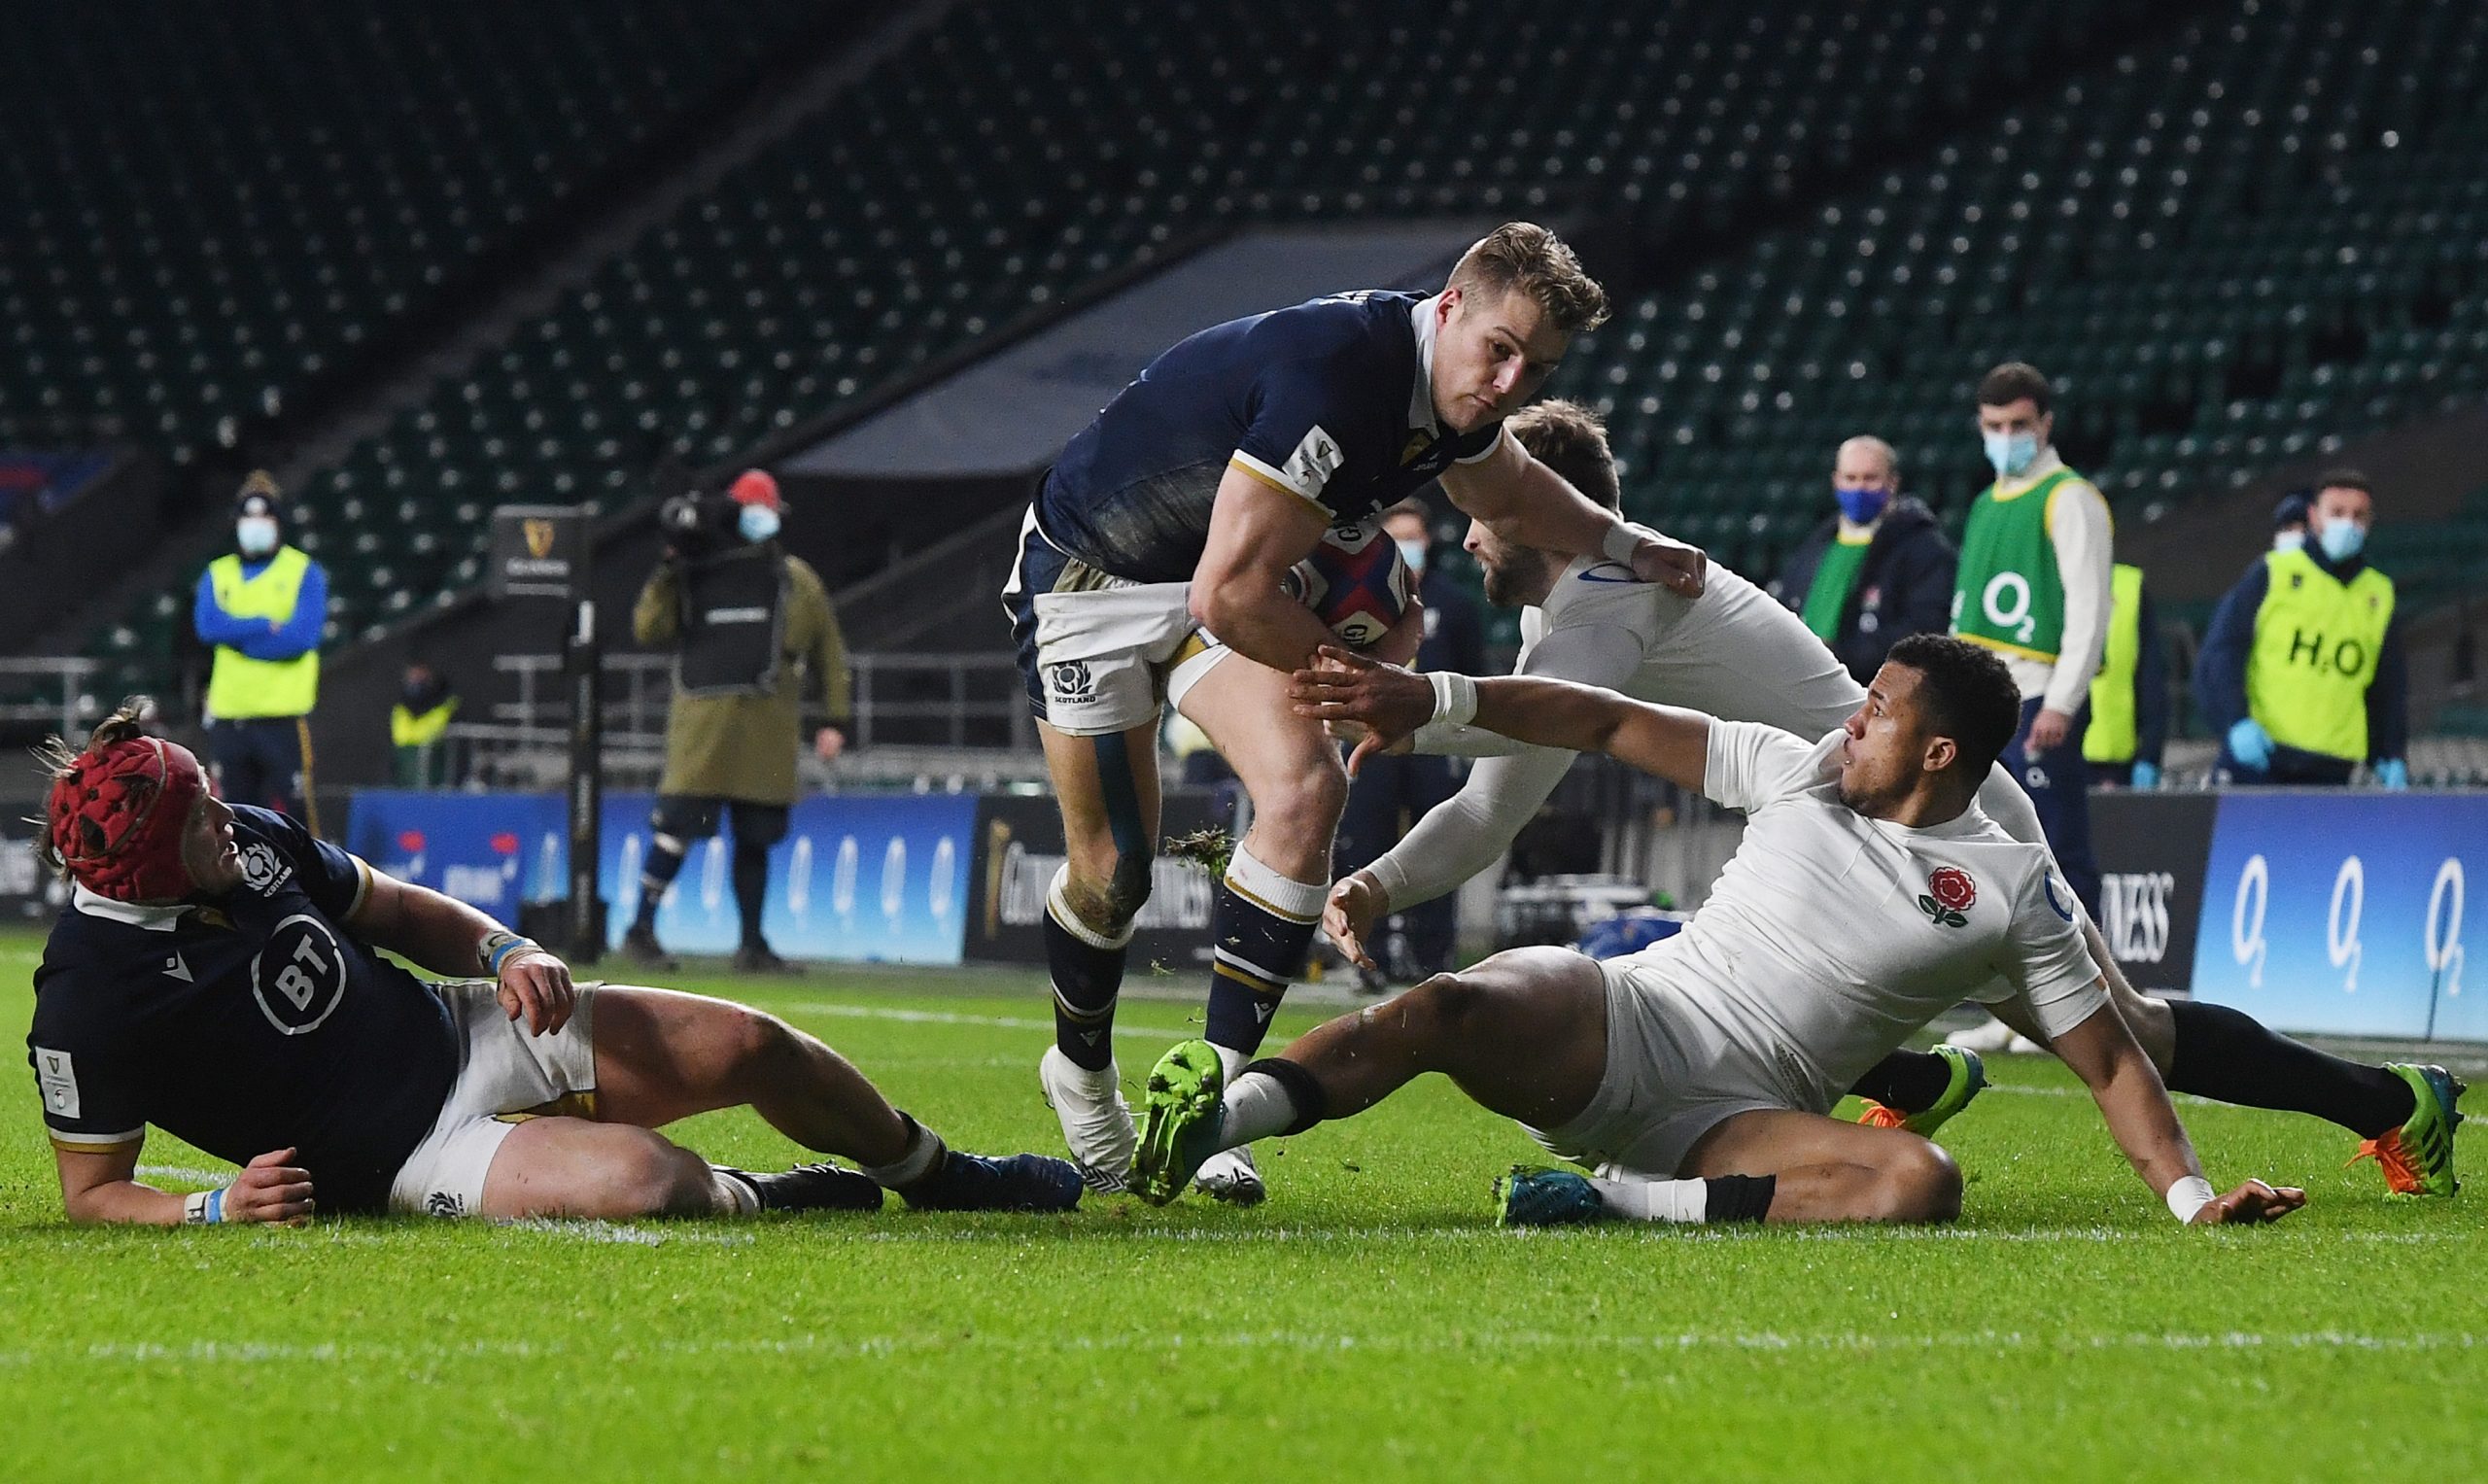 ITV 8.7m watch Scotland beat England in Six Nations Advanced Television